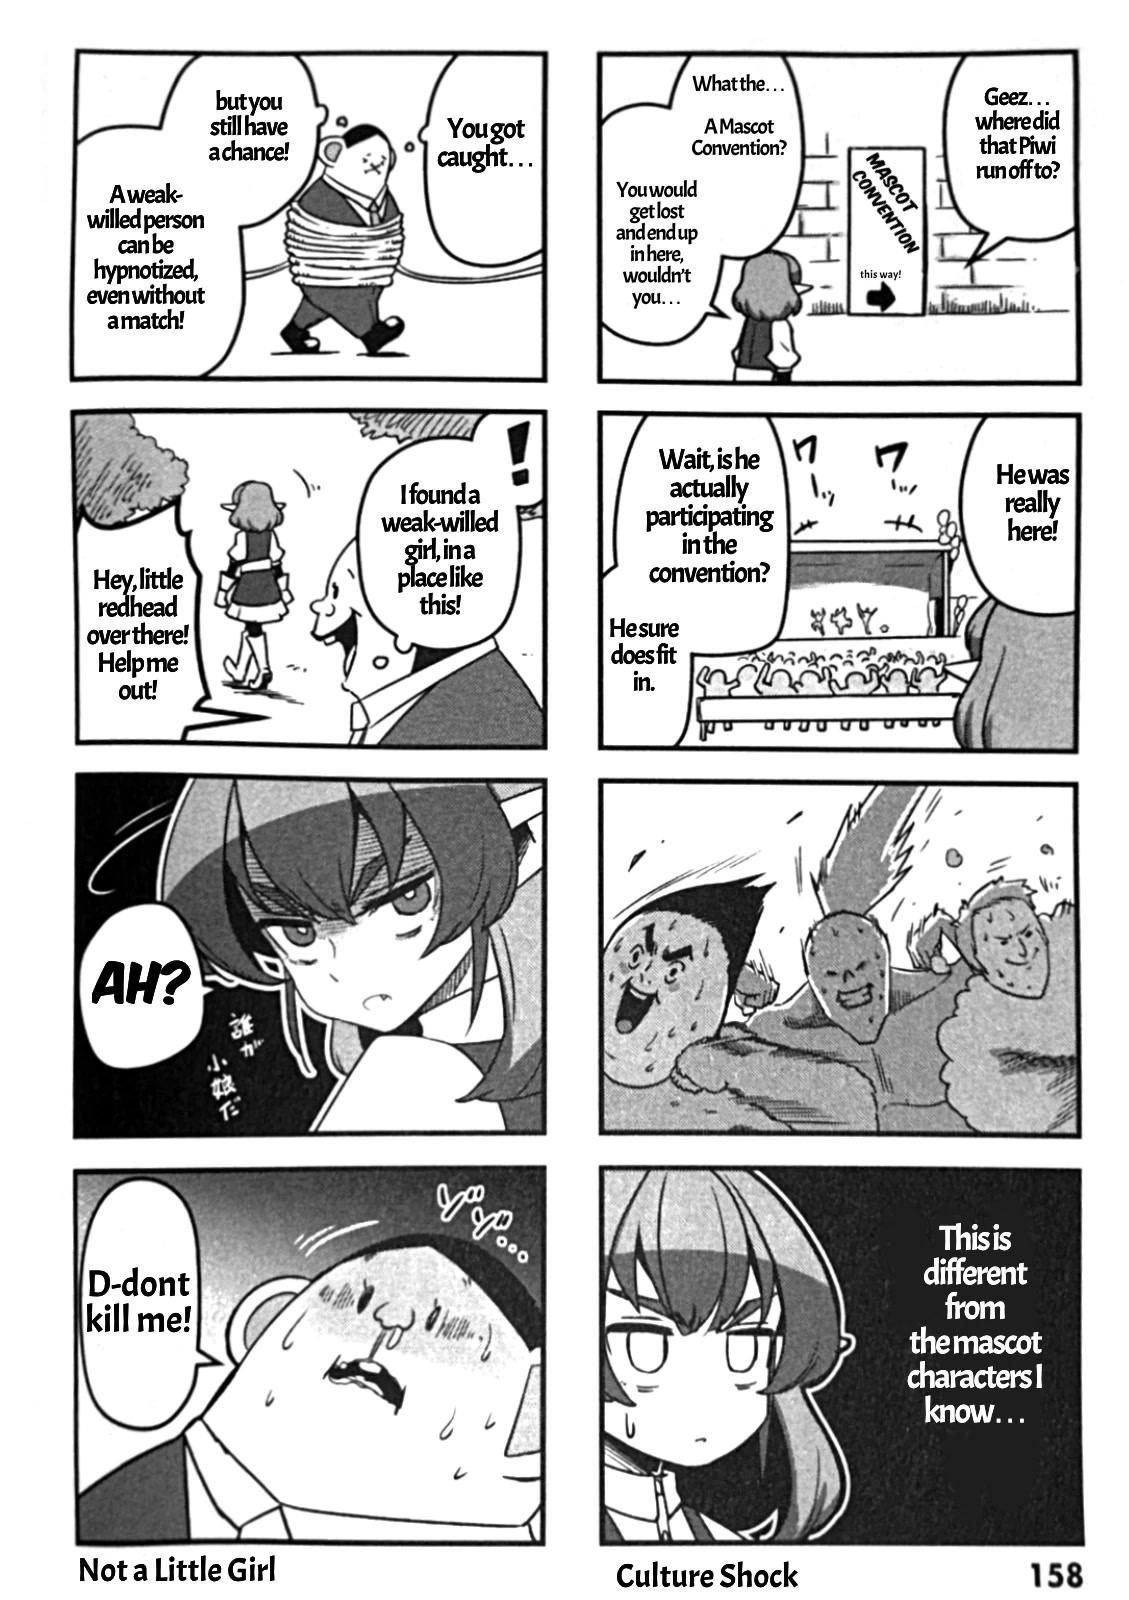 Piwi Chapter 7.5: Volume Extras - Picture 3